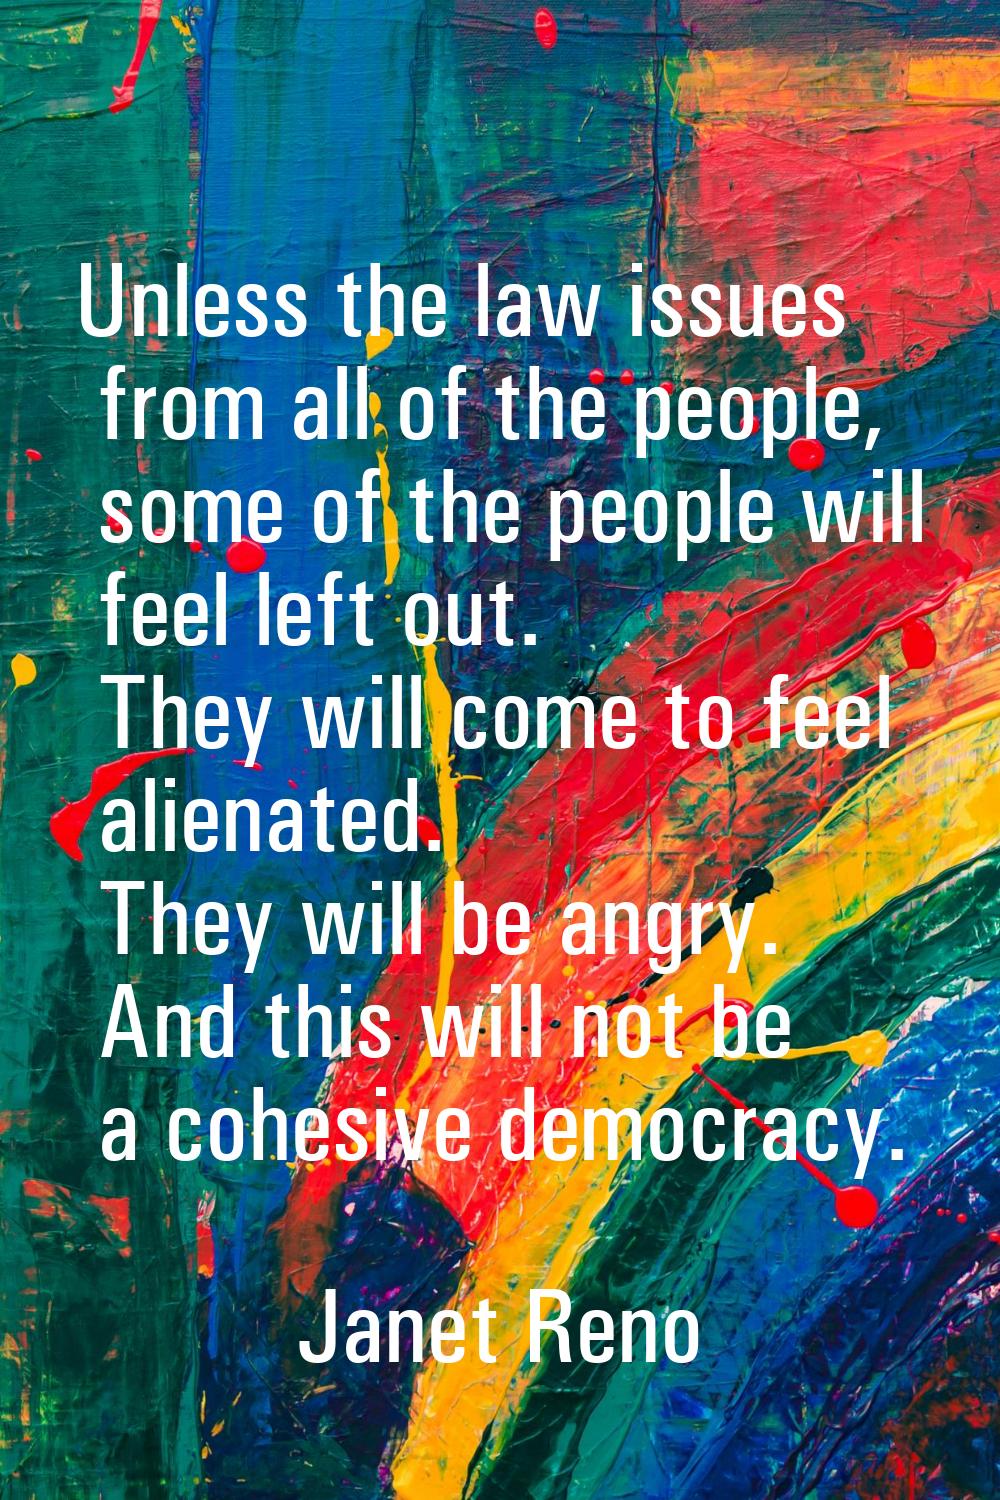 Unless the law issues from all of the people, some of the people will feel left out. They will come